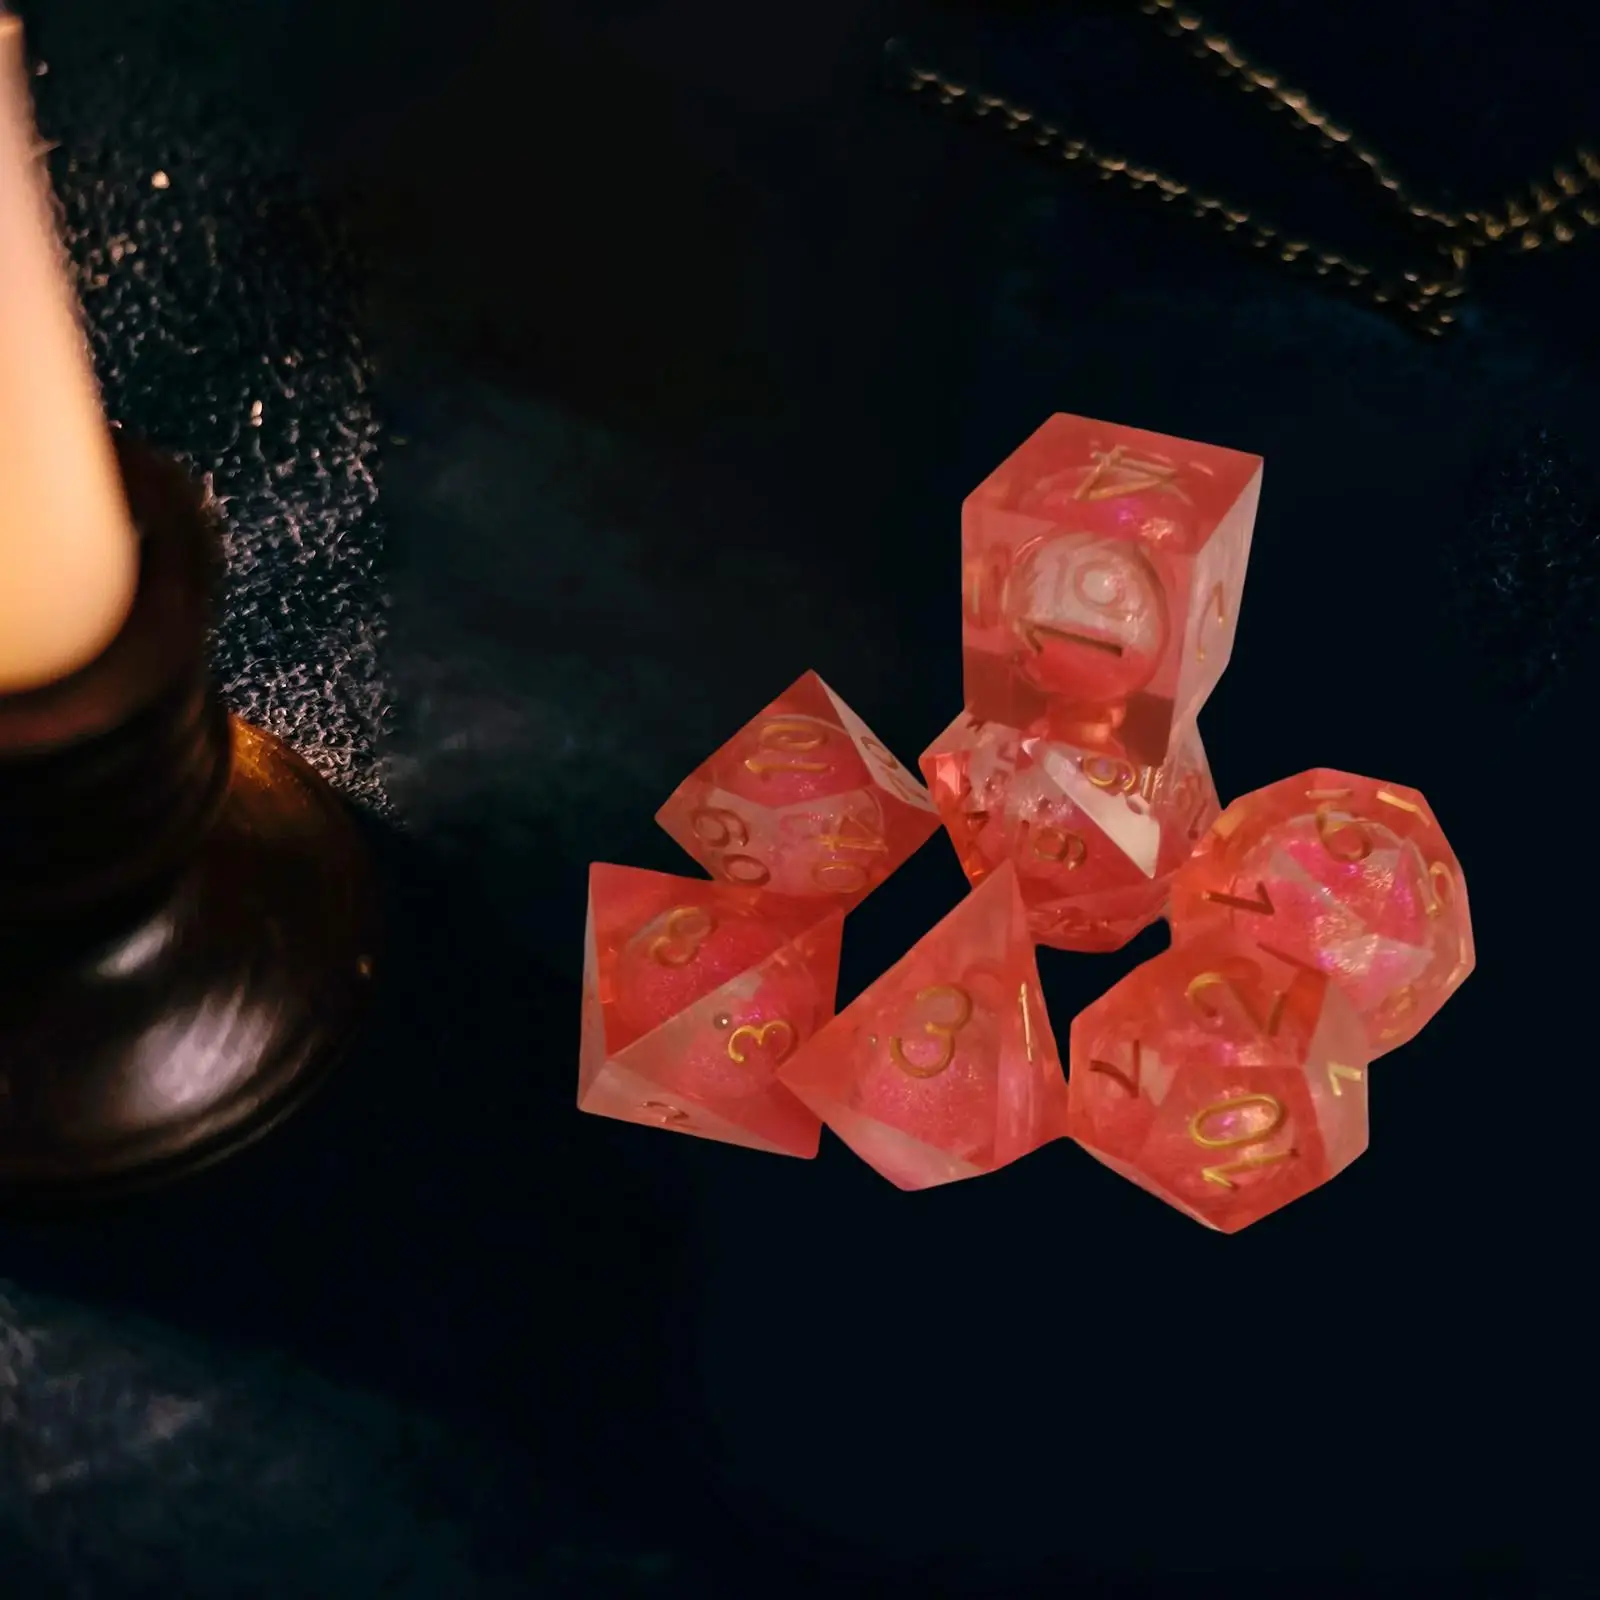 7 Pieces Multi Sided Game Dices Party Favors Novelty D20 D12 D10 D8 D6 D4 Polyhedral Dices for KTV Party Bar Role Playing Game